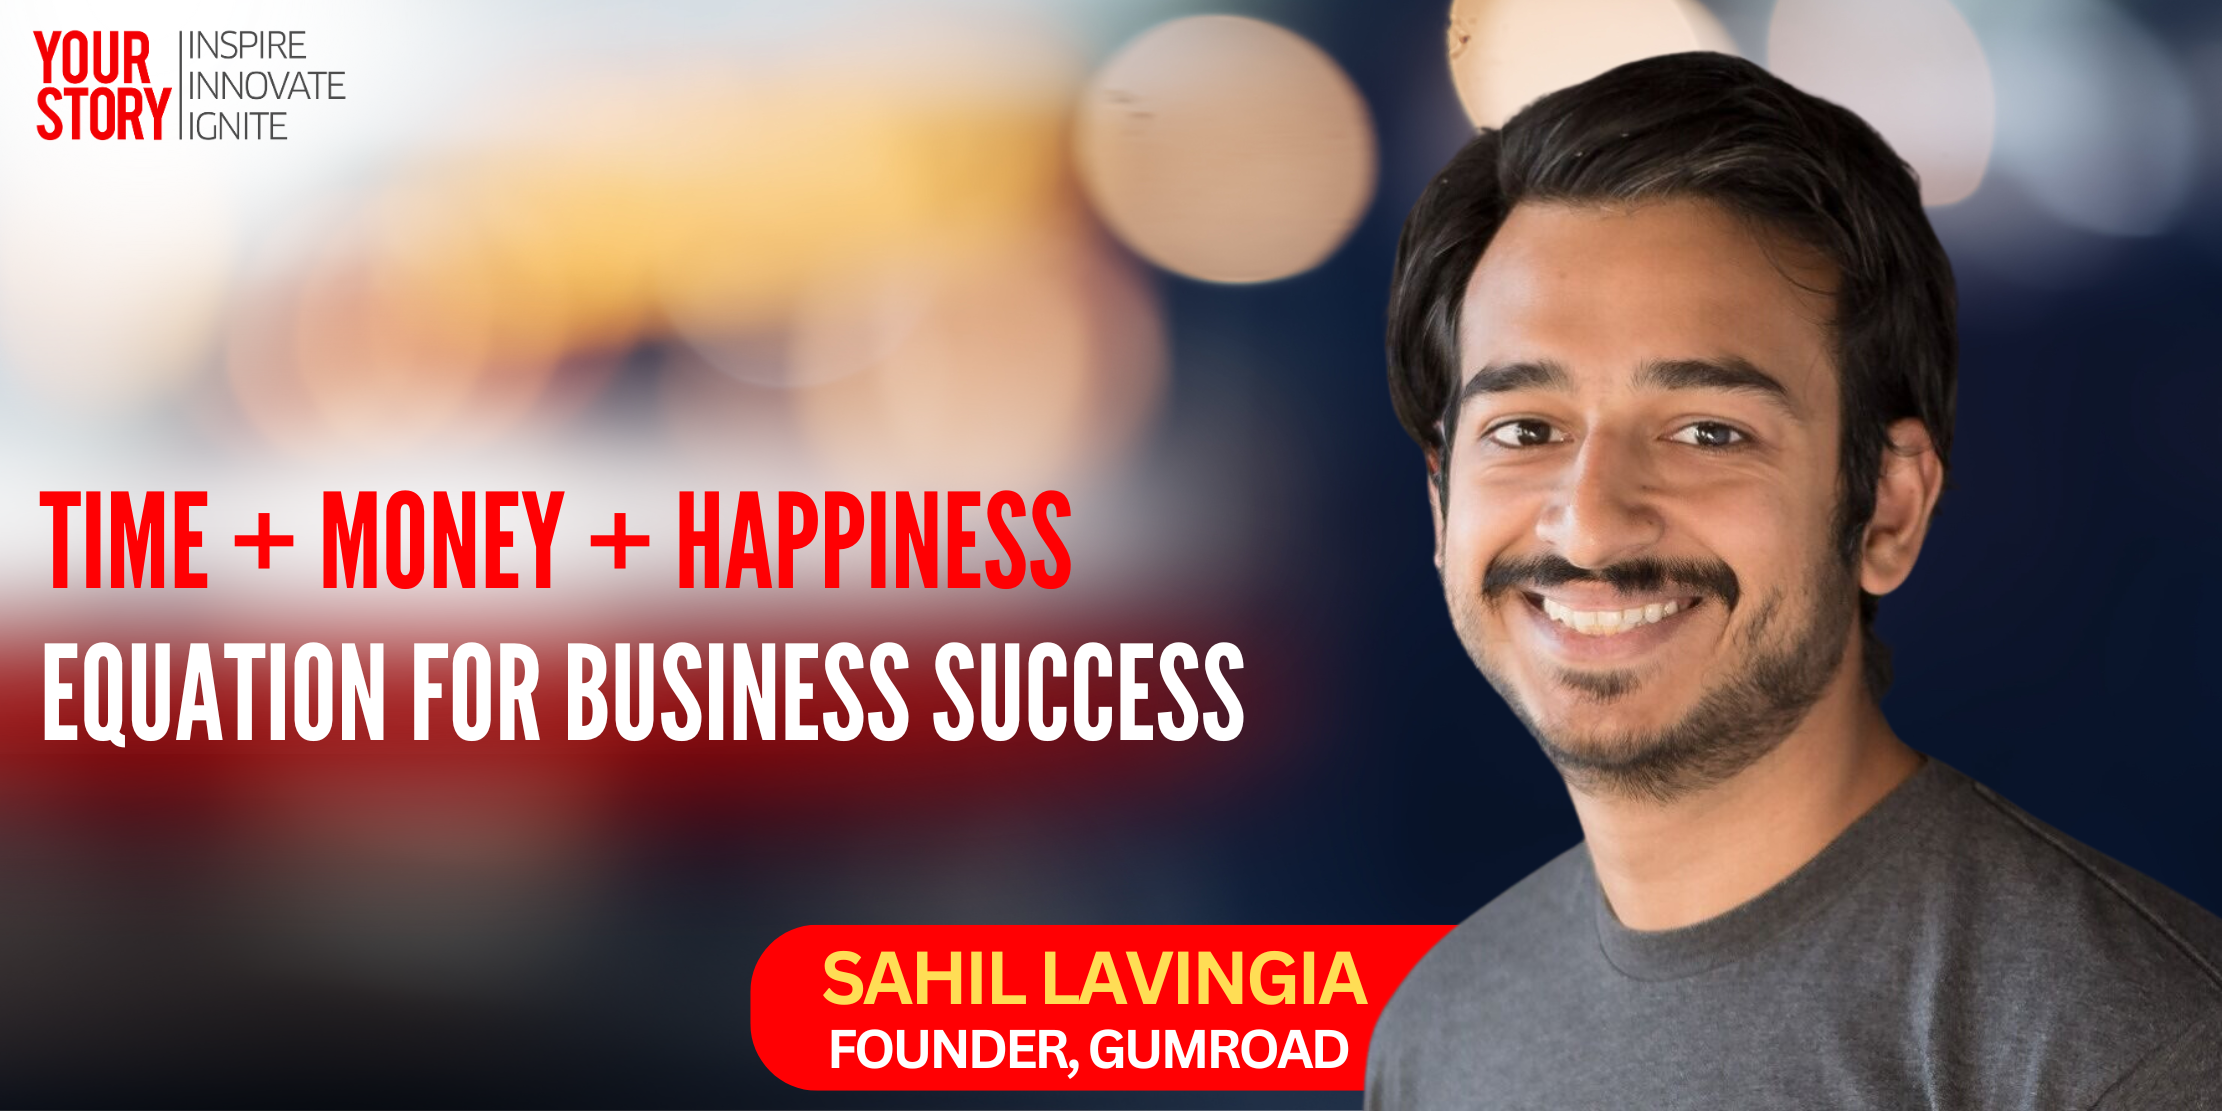 ⁠⁠Time + Money + Happiness: The Lavingia Equation for Building a Business